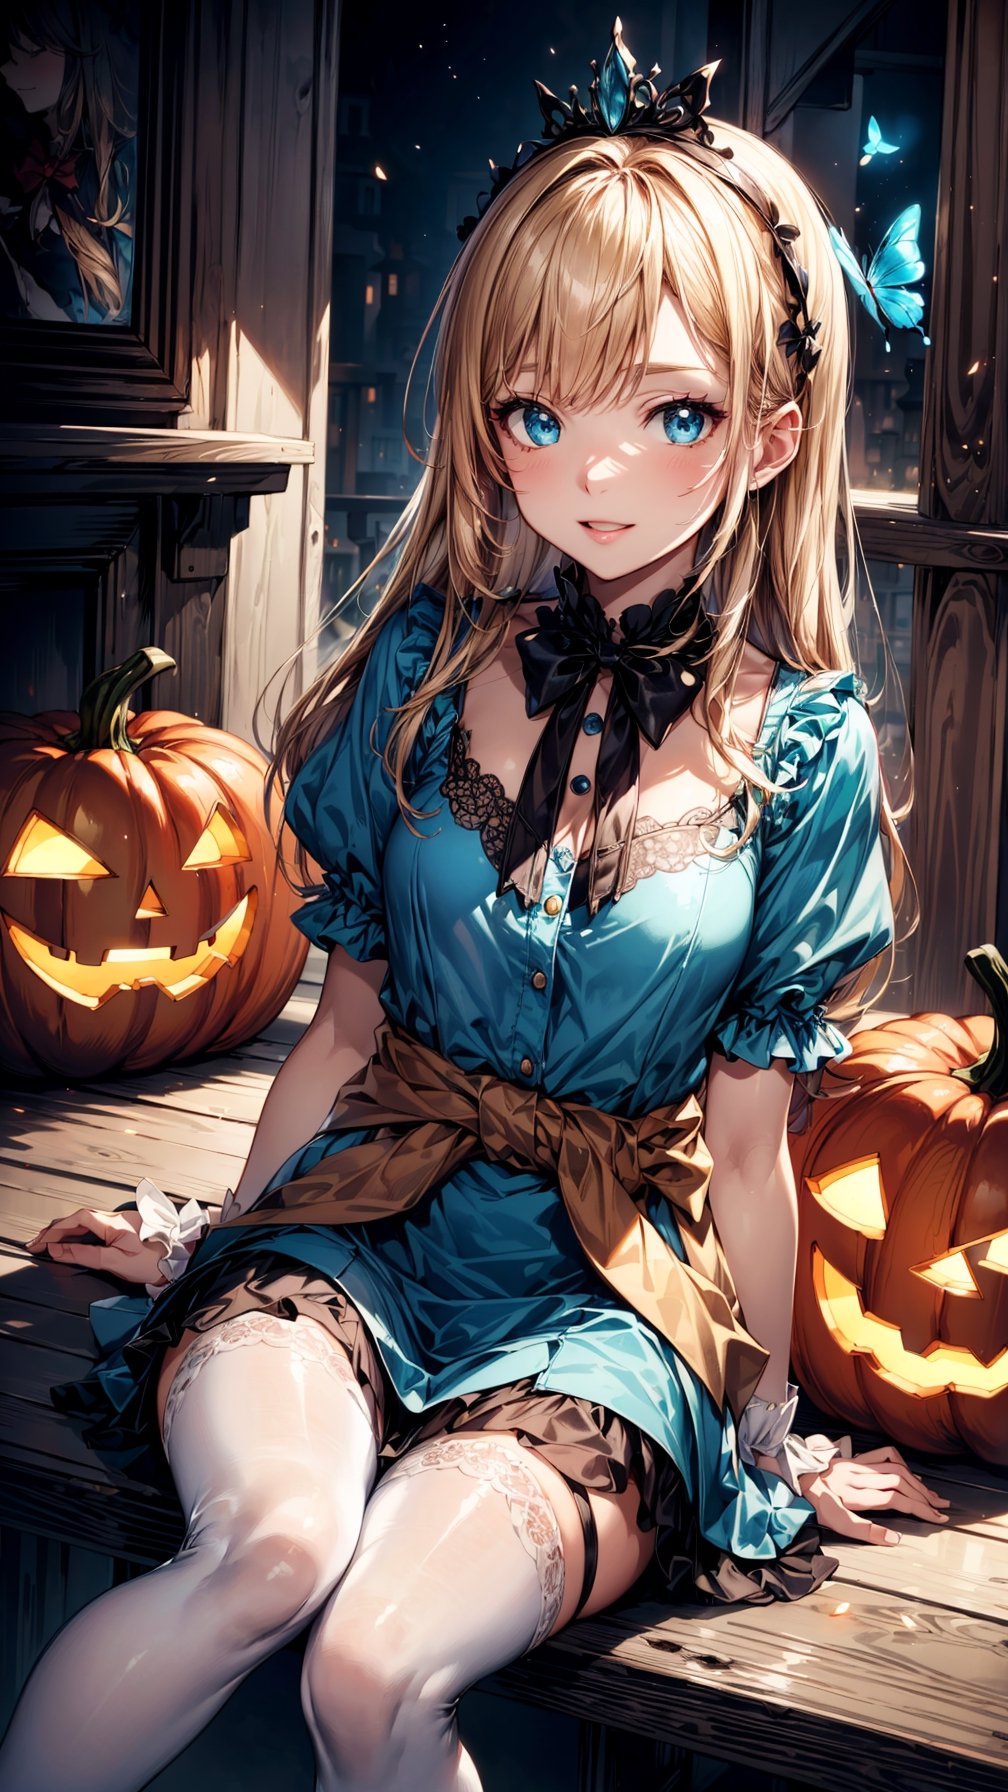 (best quality, masterpiece, illustration, designer, lighting), (extremely detailed CG 8k wallpaper unit), (detailed and expressive eyes), detailed particles, beautiful lighting, a cute girl, long blonde hair, wearing a teddy bear tiara, ((Portable  glowing jack-o'-lantern)),sitting,light smile,donning a beautiful blue and white dress with ruffles and lace, sheer pink stockings, transparent aquamarine crystal shoes, bows around her waist (Alice in Wonderland), butterflies around, (Pixiv anime style), (Wit studios),(manga style), 